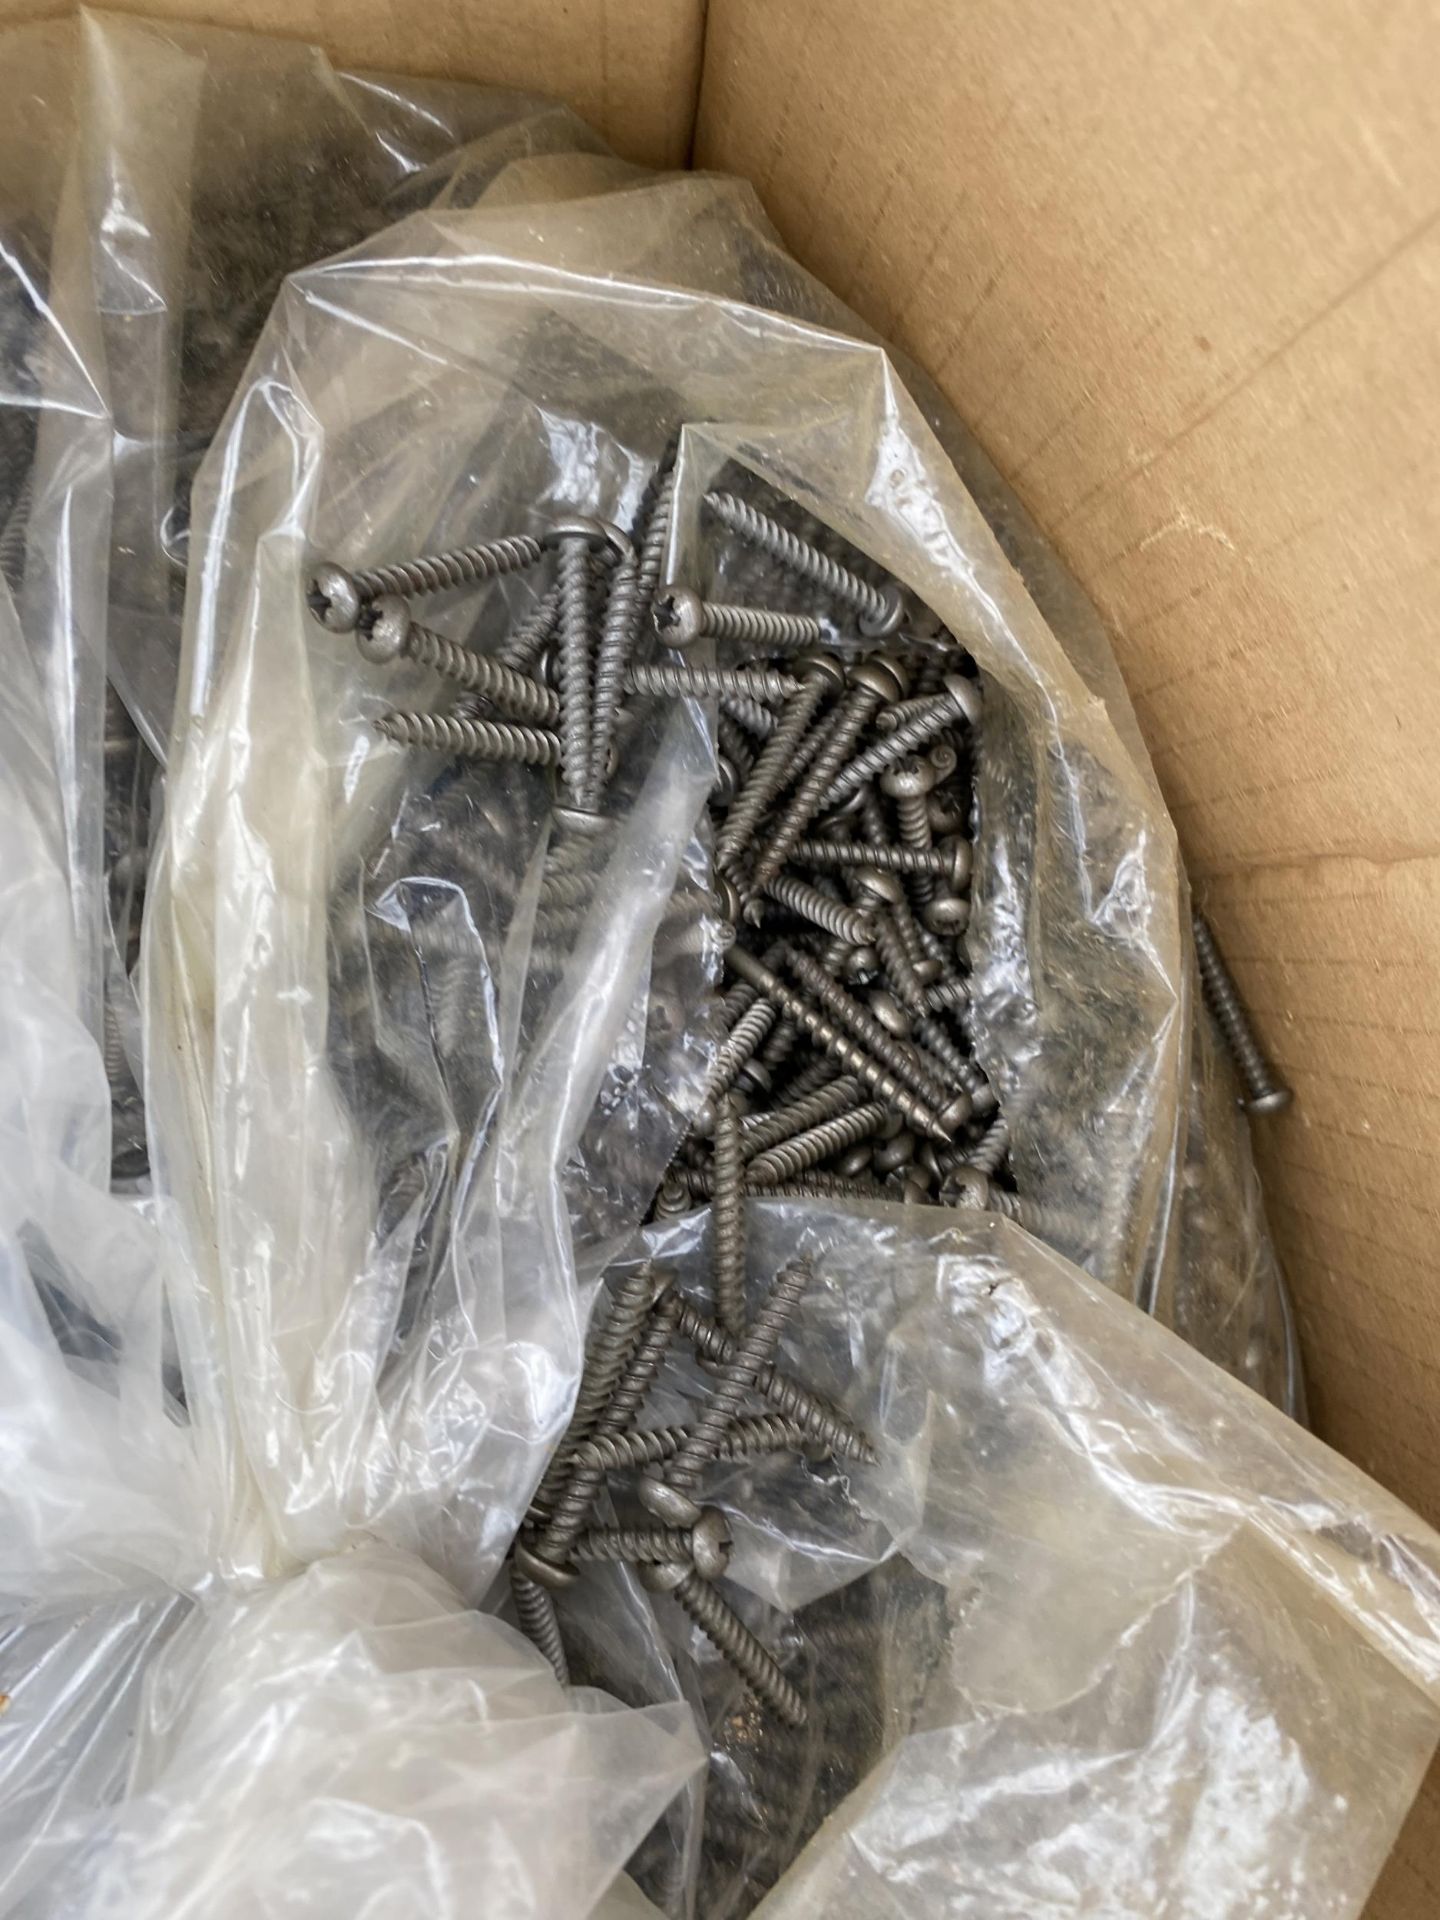 A LARGE QUANTITY OF SCREWS - Image 2 of 3